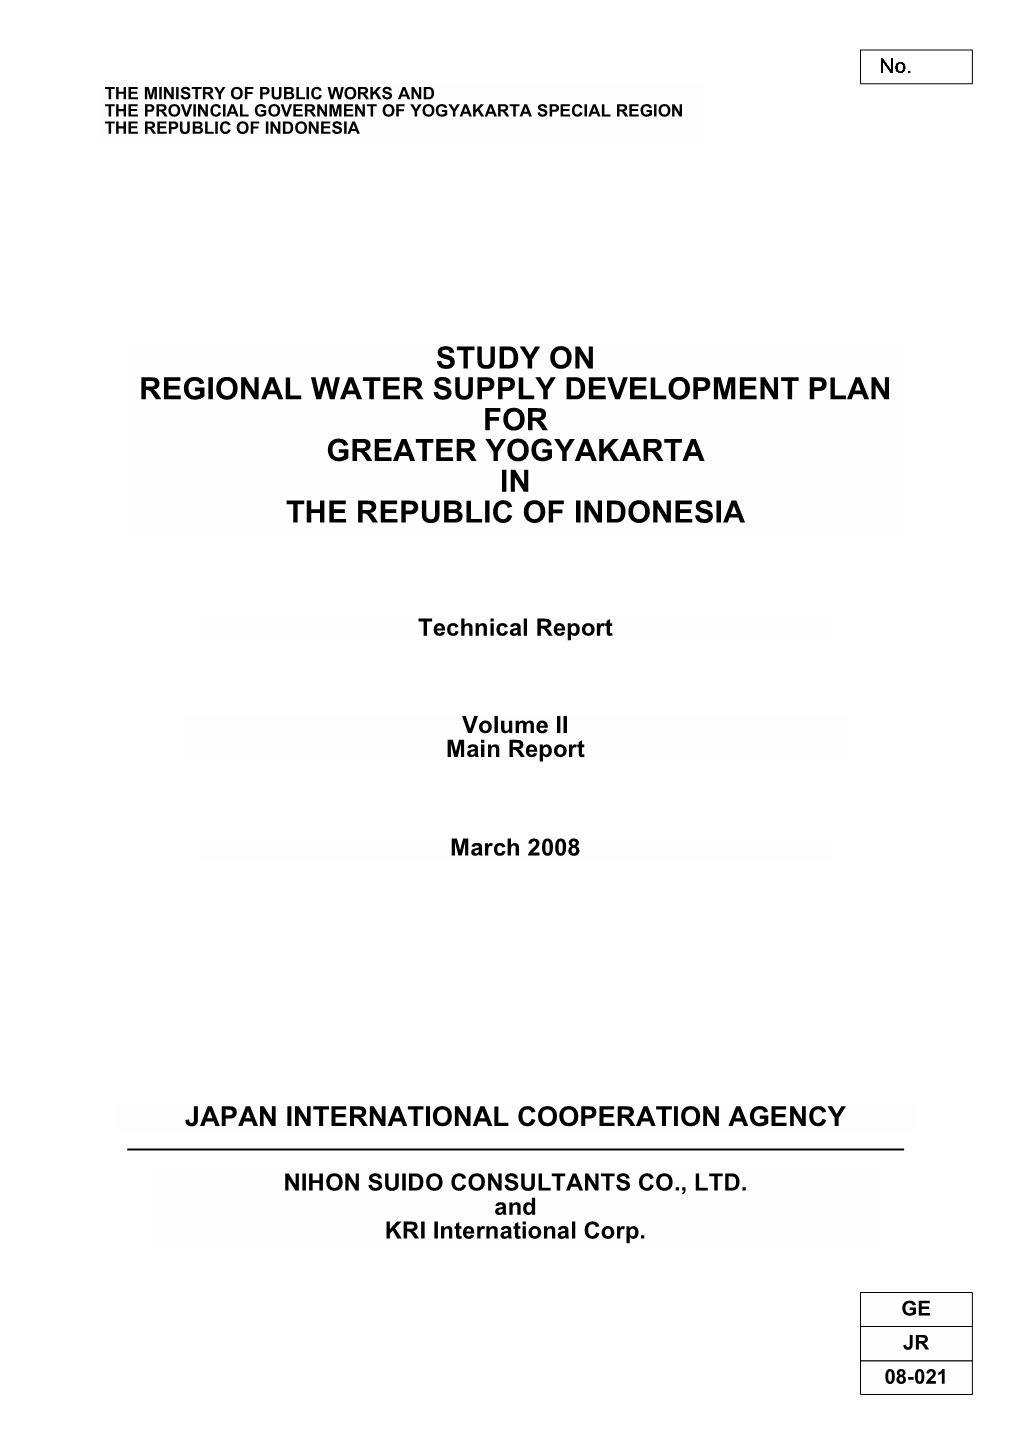 Study on Regional Water Supply Development Plan for Greater Yogyakarta in the Republic of Indonesia